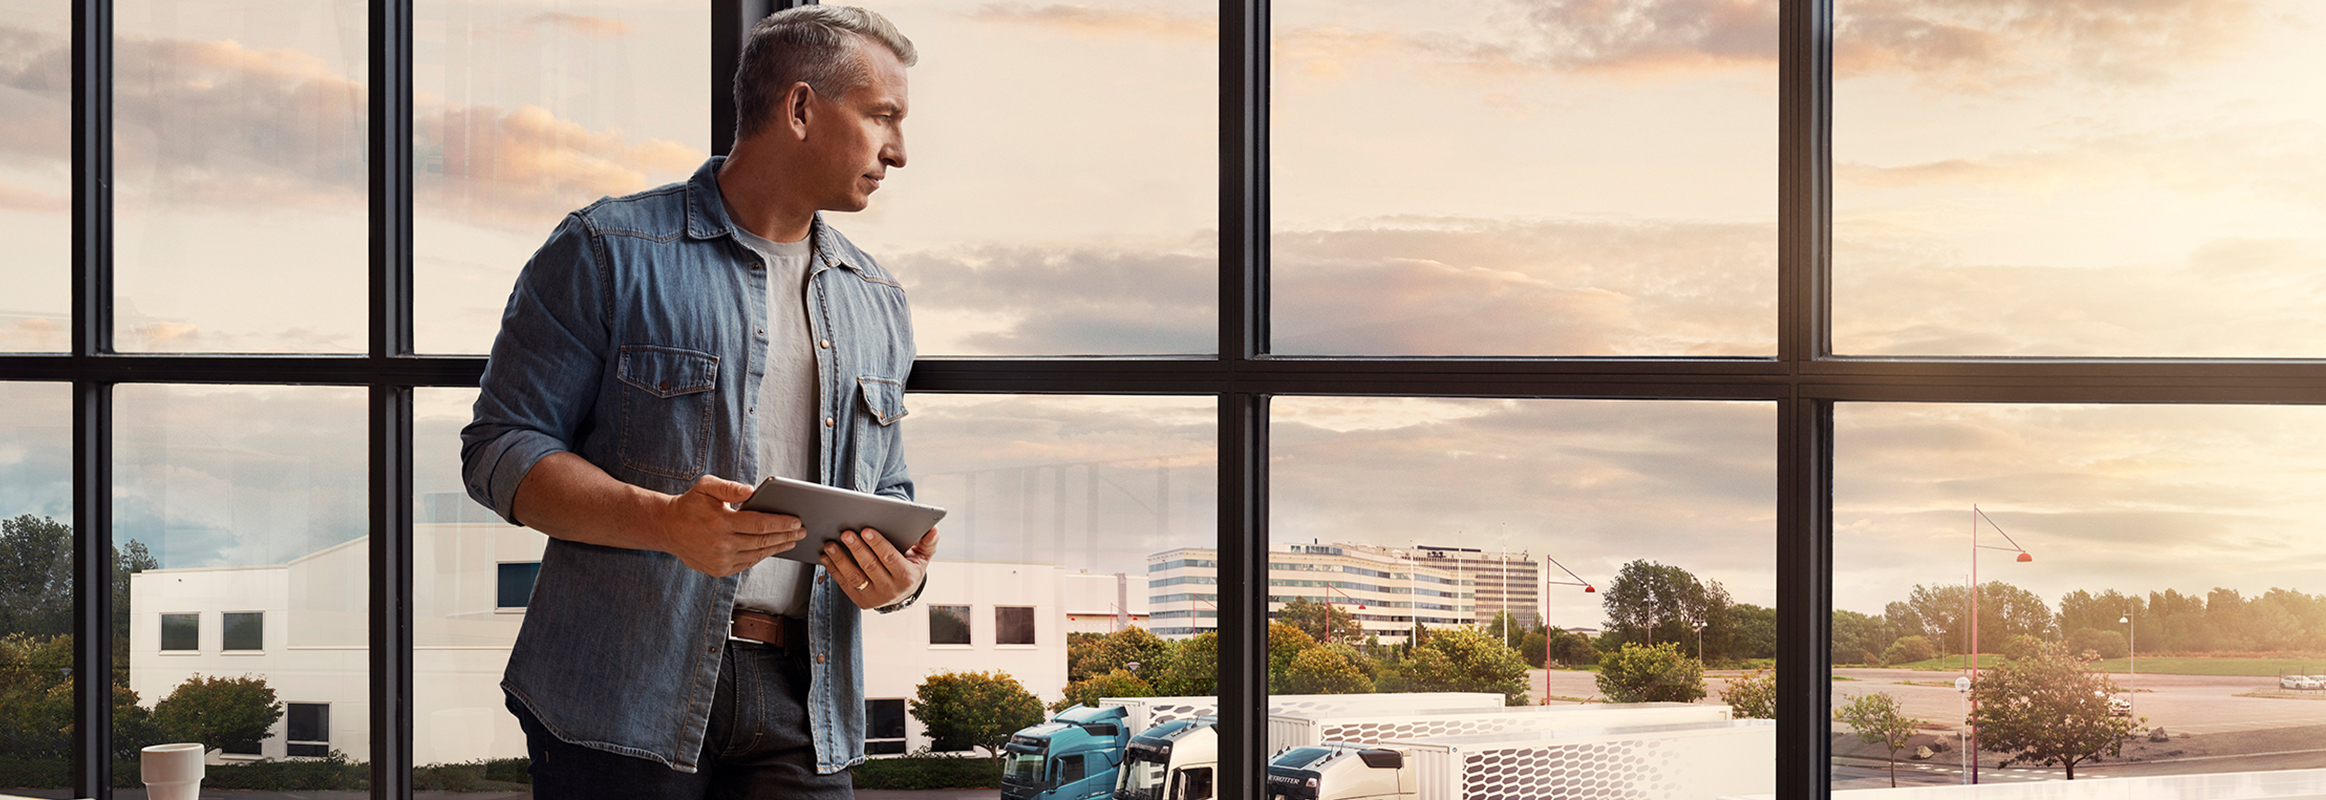 A man holding a tablet stands by a window and looks down over his truck fleet